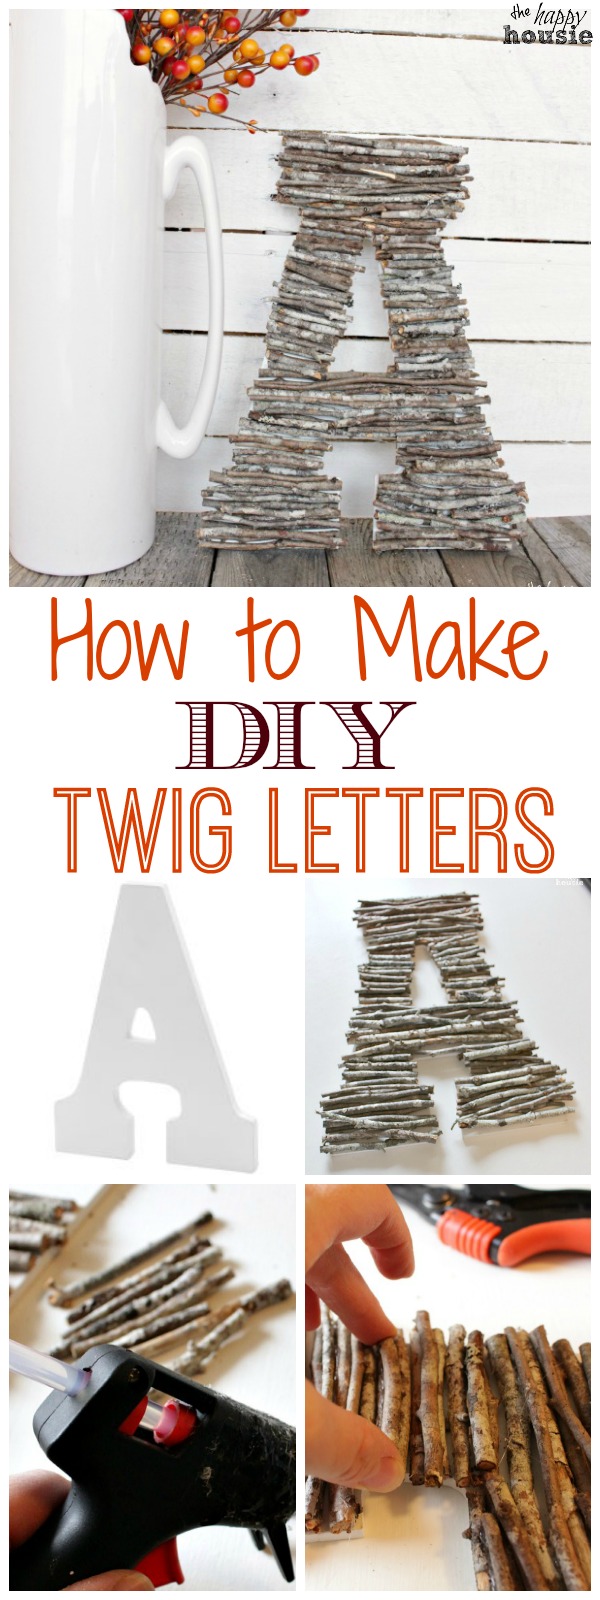 How to make DIY twig letters graphic.